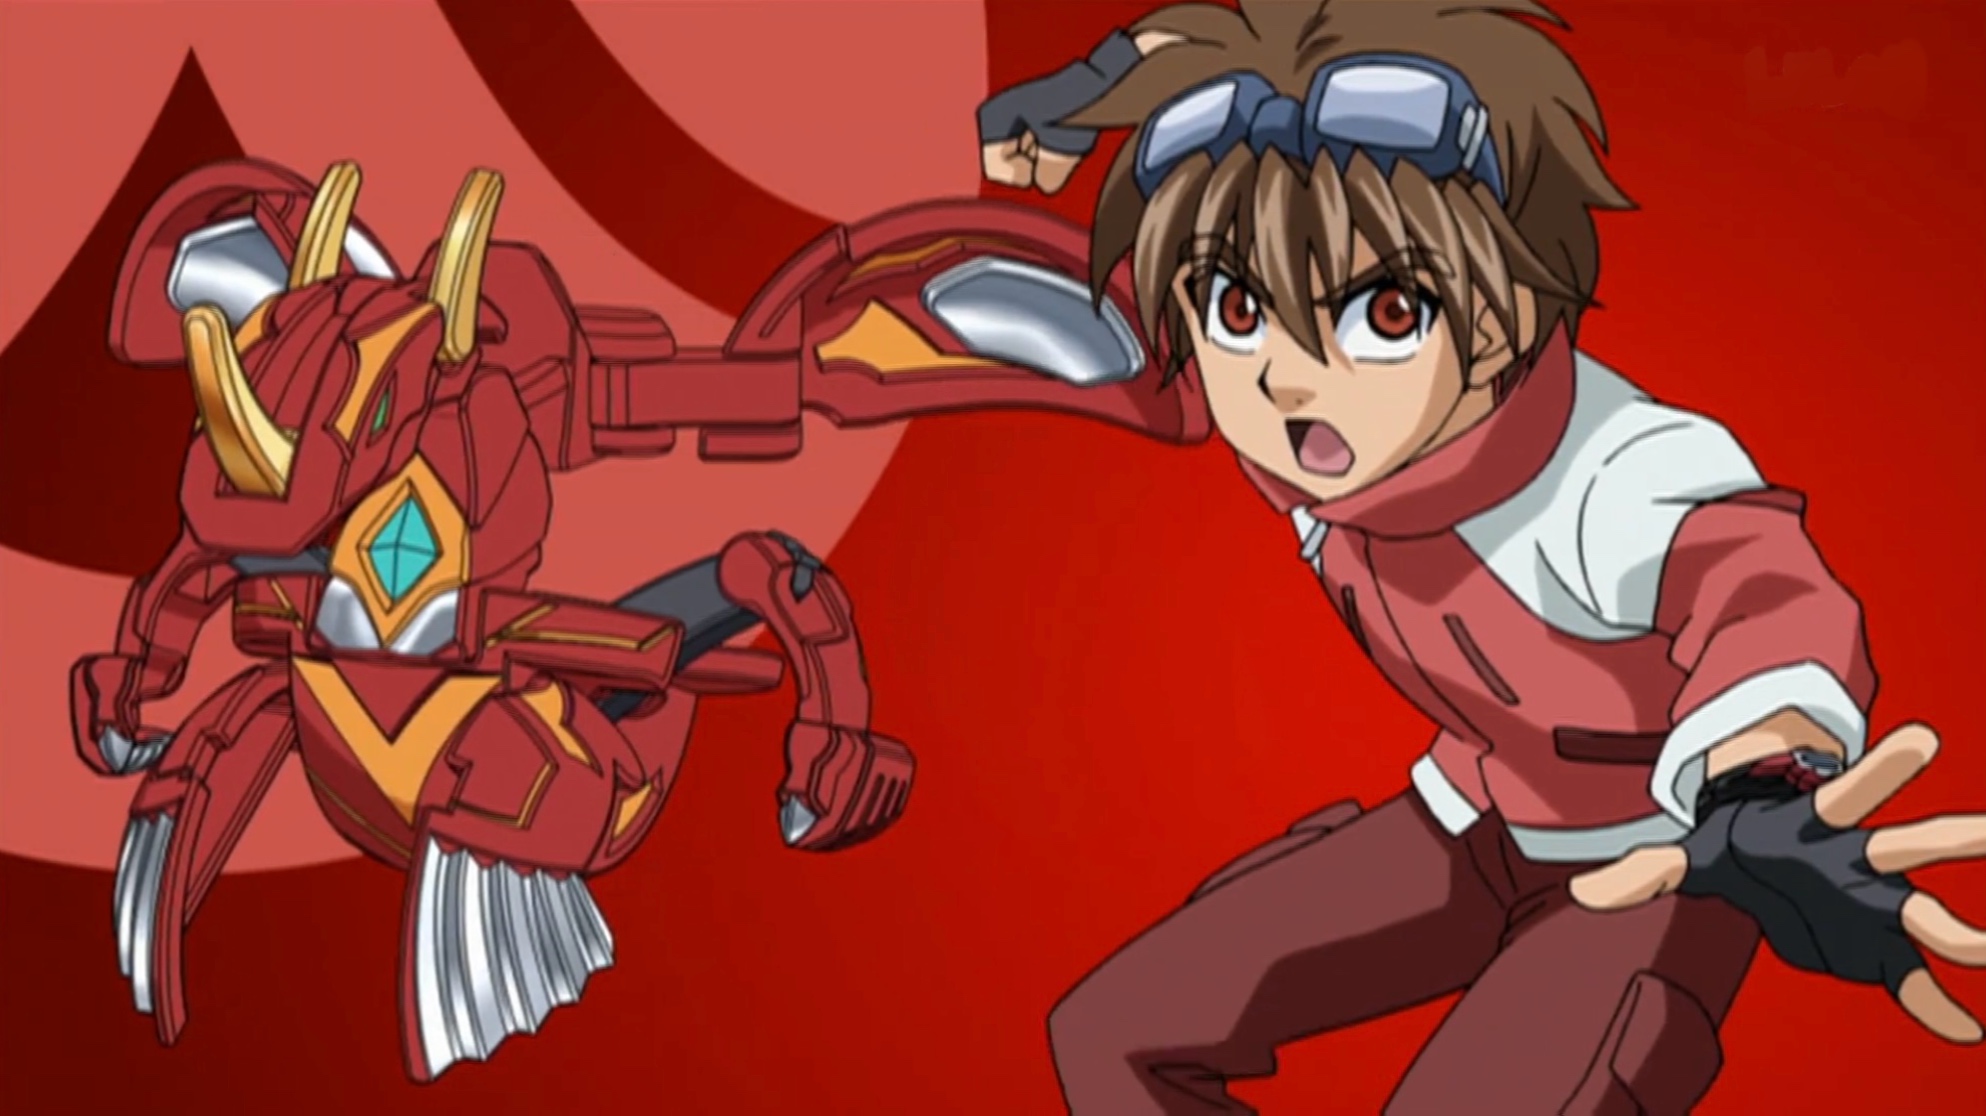 Bakugan Wiki on X: A second Bakugan trailer has been released, covering  basic details and top secret intel concerning the new Dan Kouzo.   / X